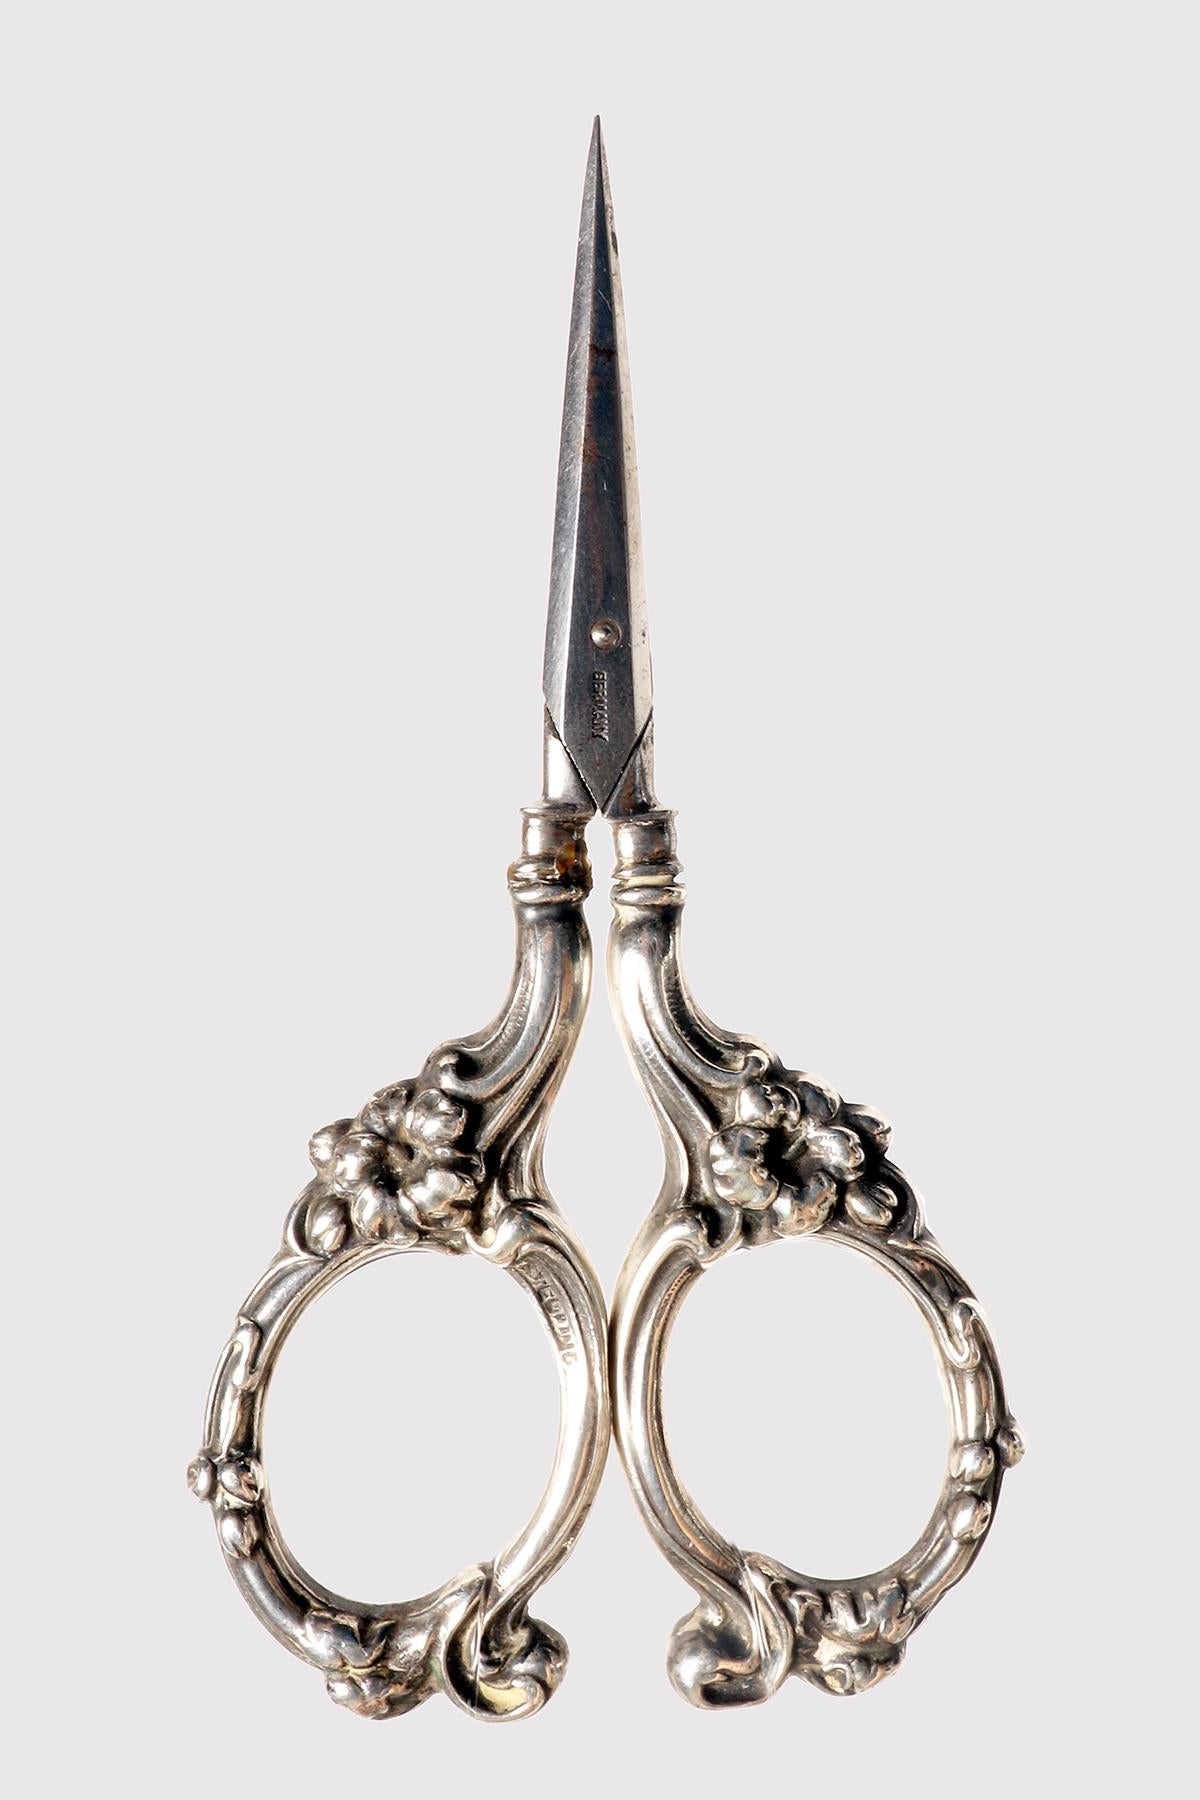 Sterling Silver Scissors to Cut the Stems of the Bunches of Grapes, USA, 1900 For Sale 2